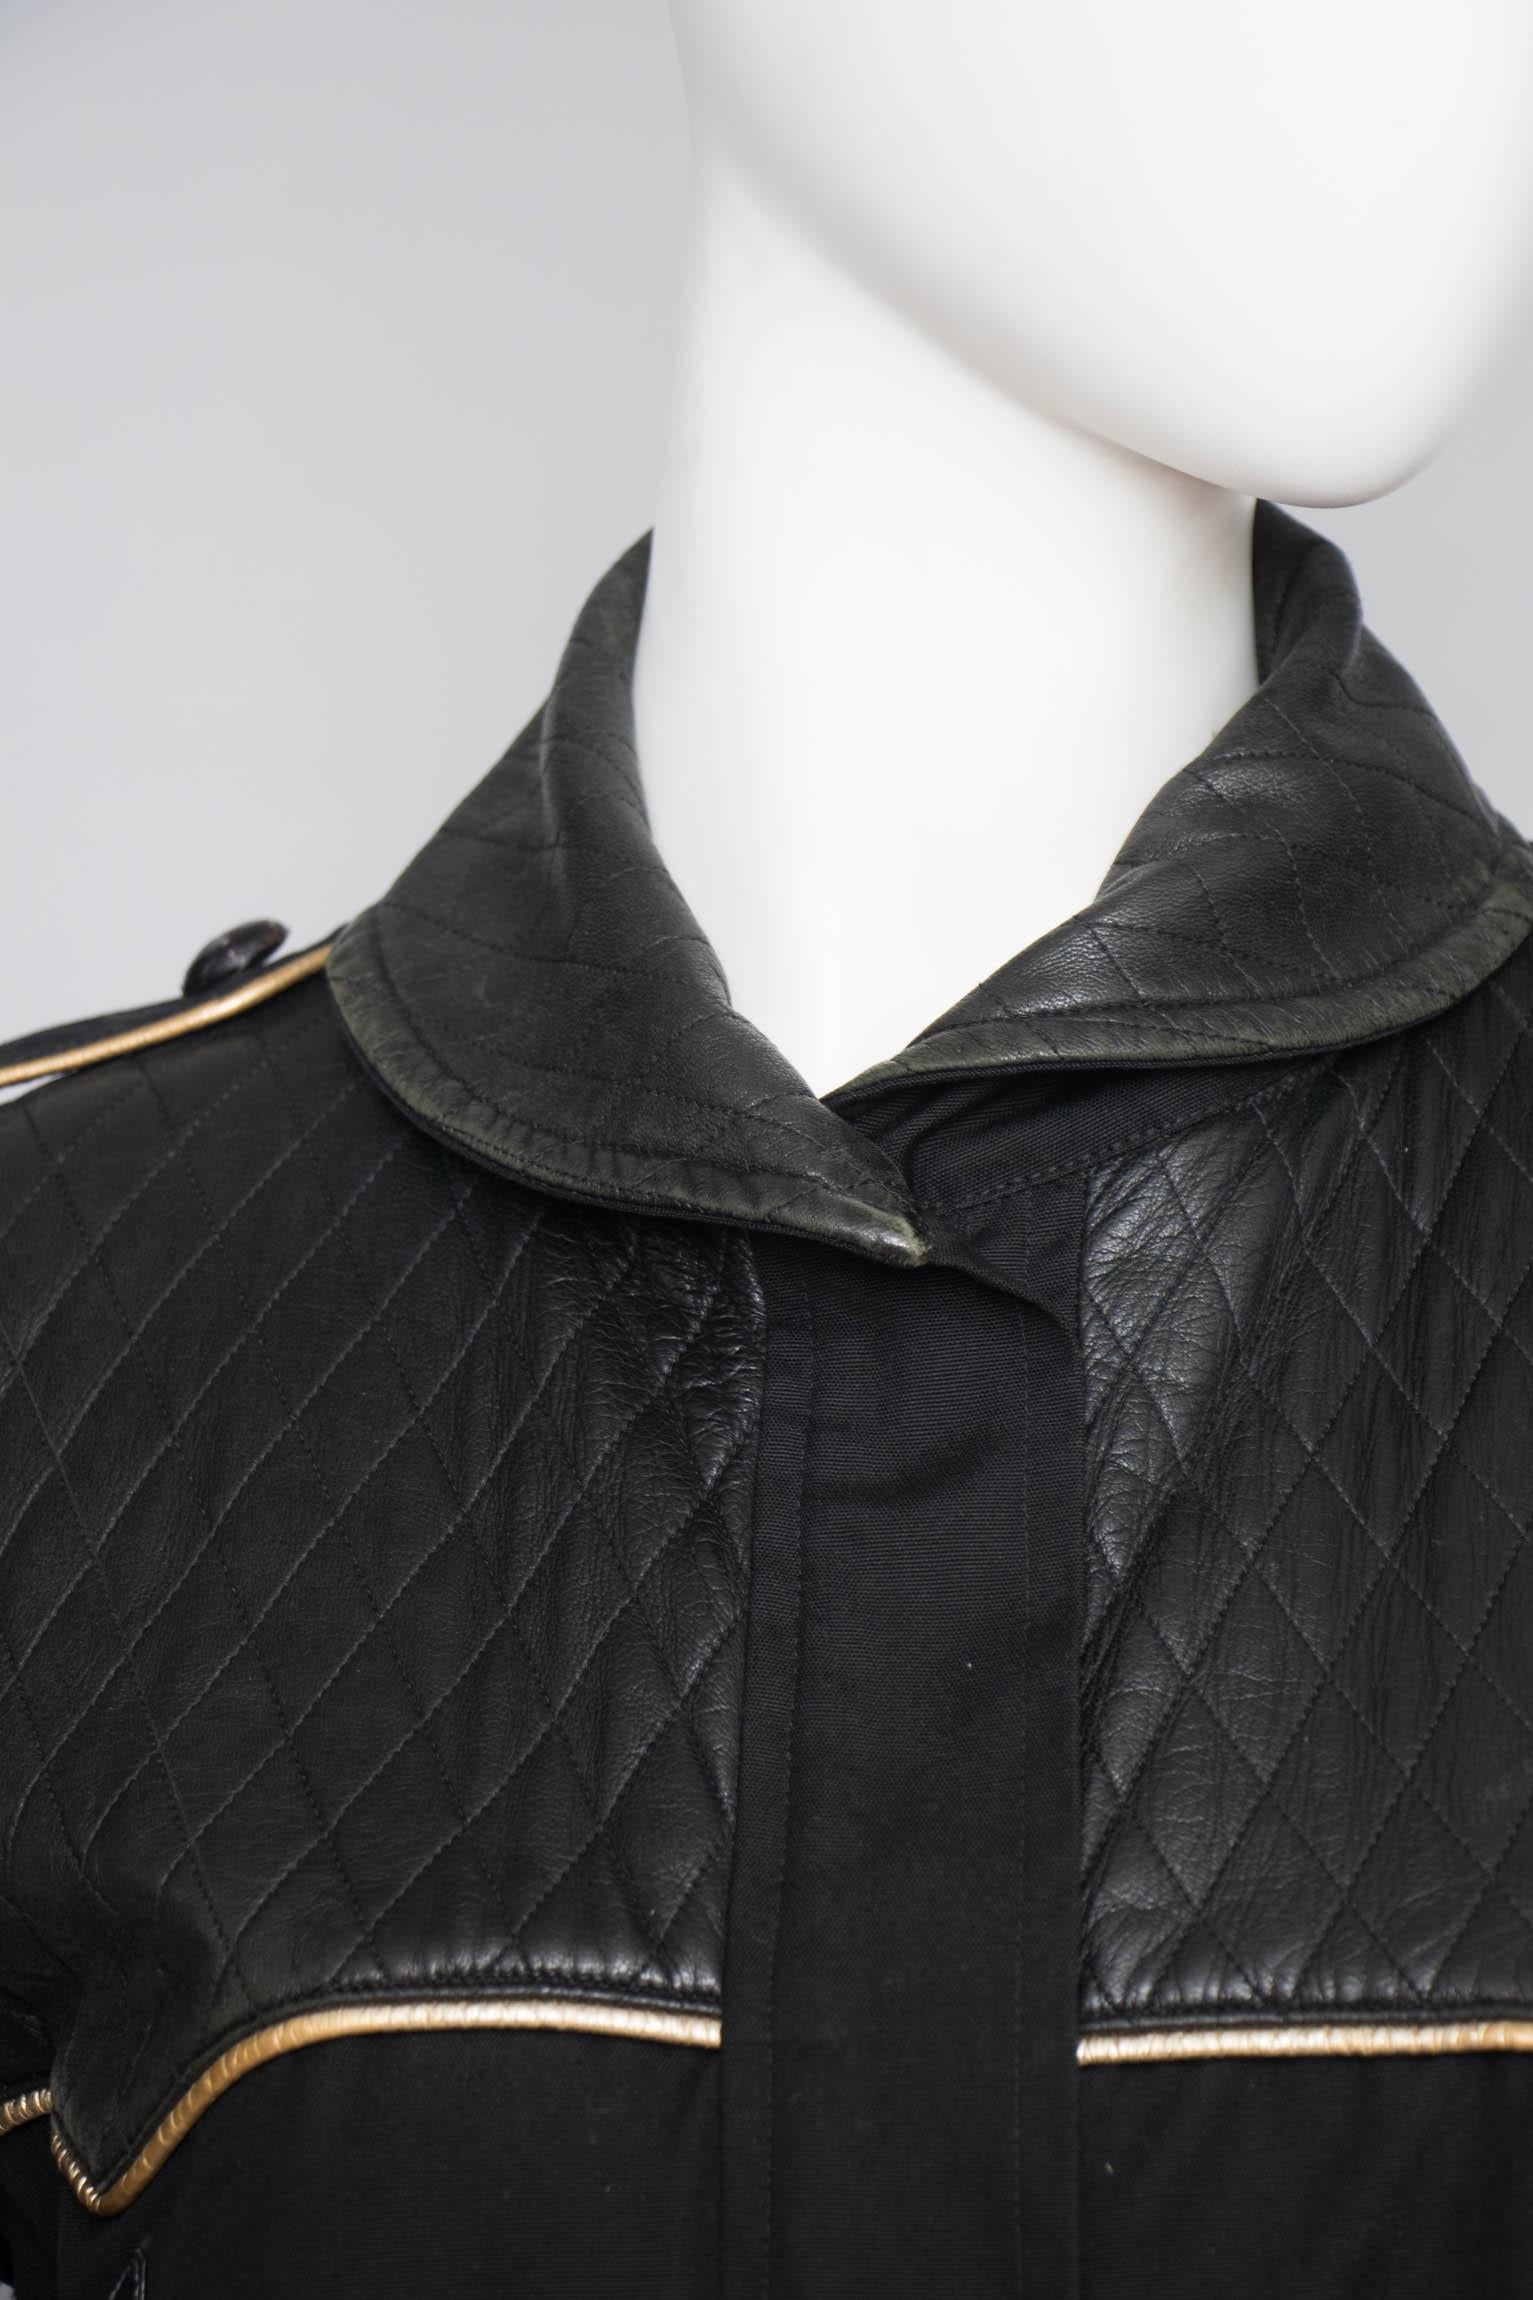 Yves Saint Laurent Rive Gauche Jacket with Leather and Gold Trim, 1980s 3